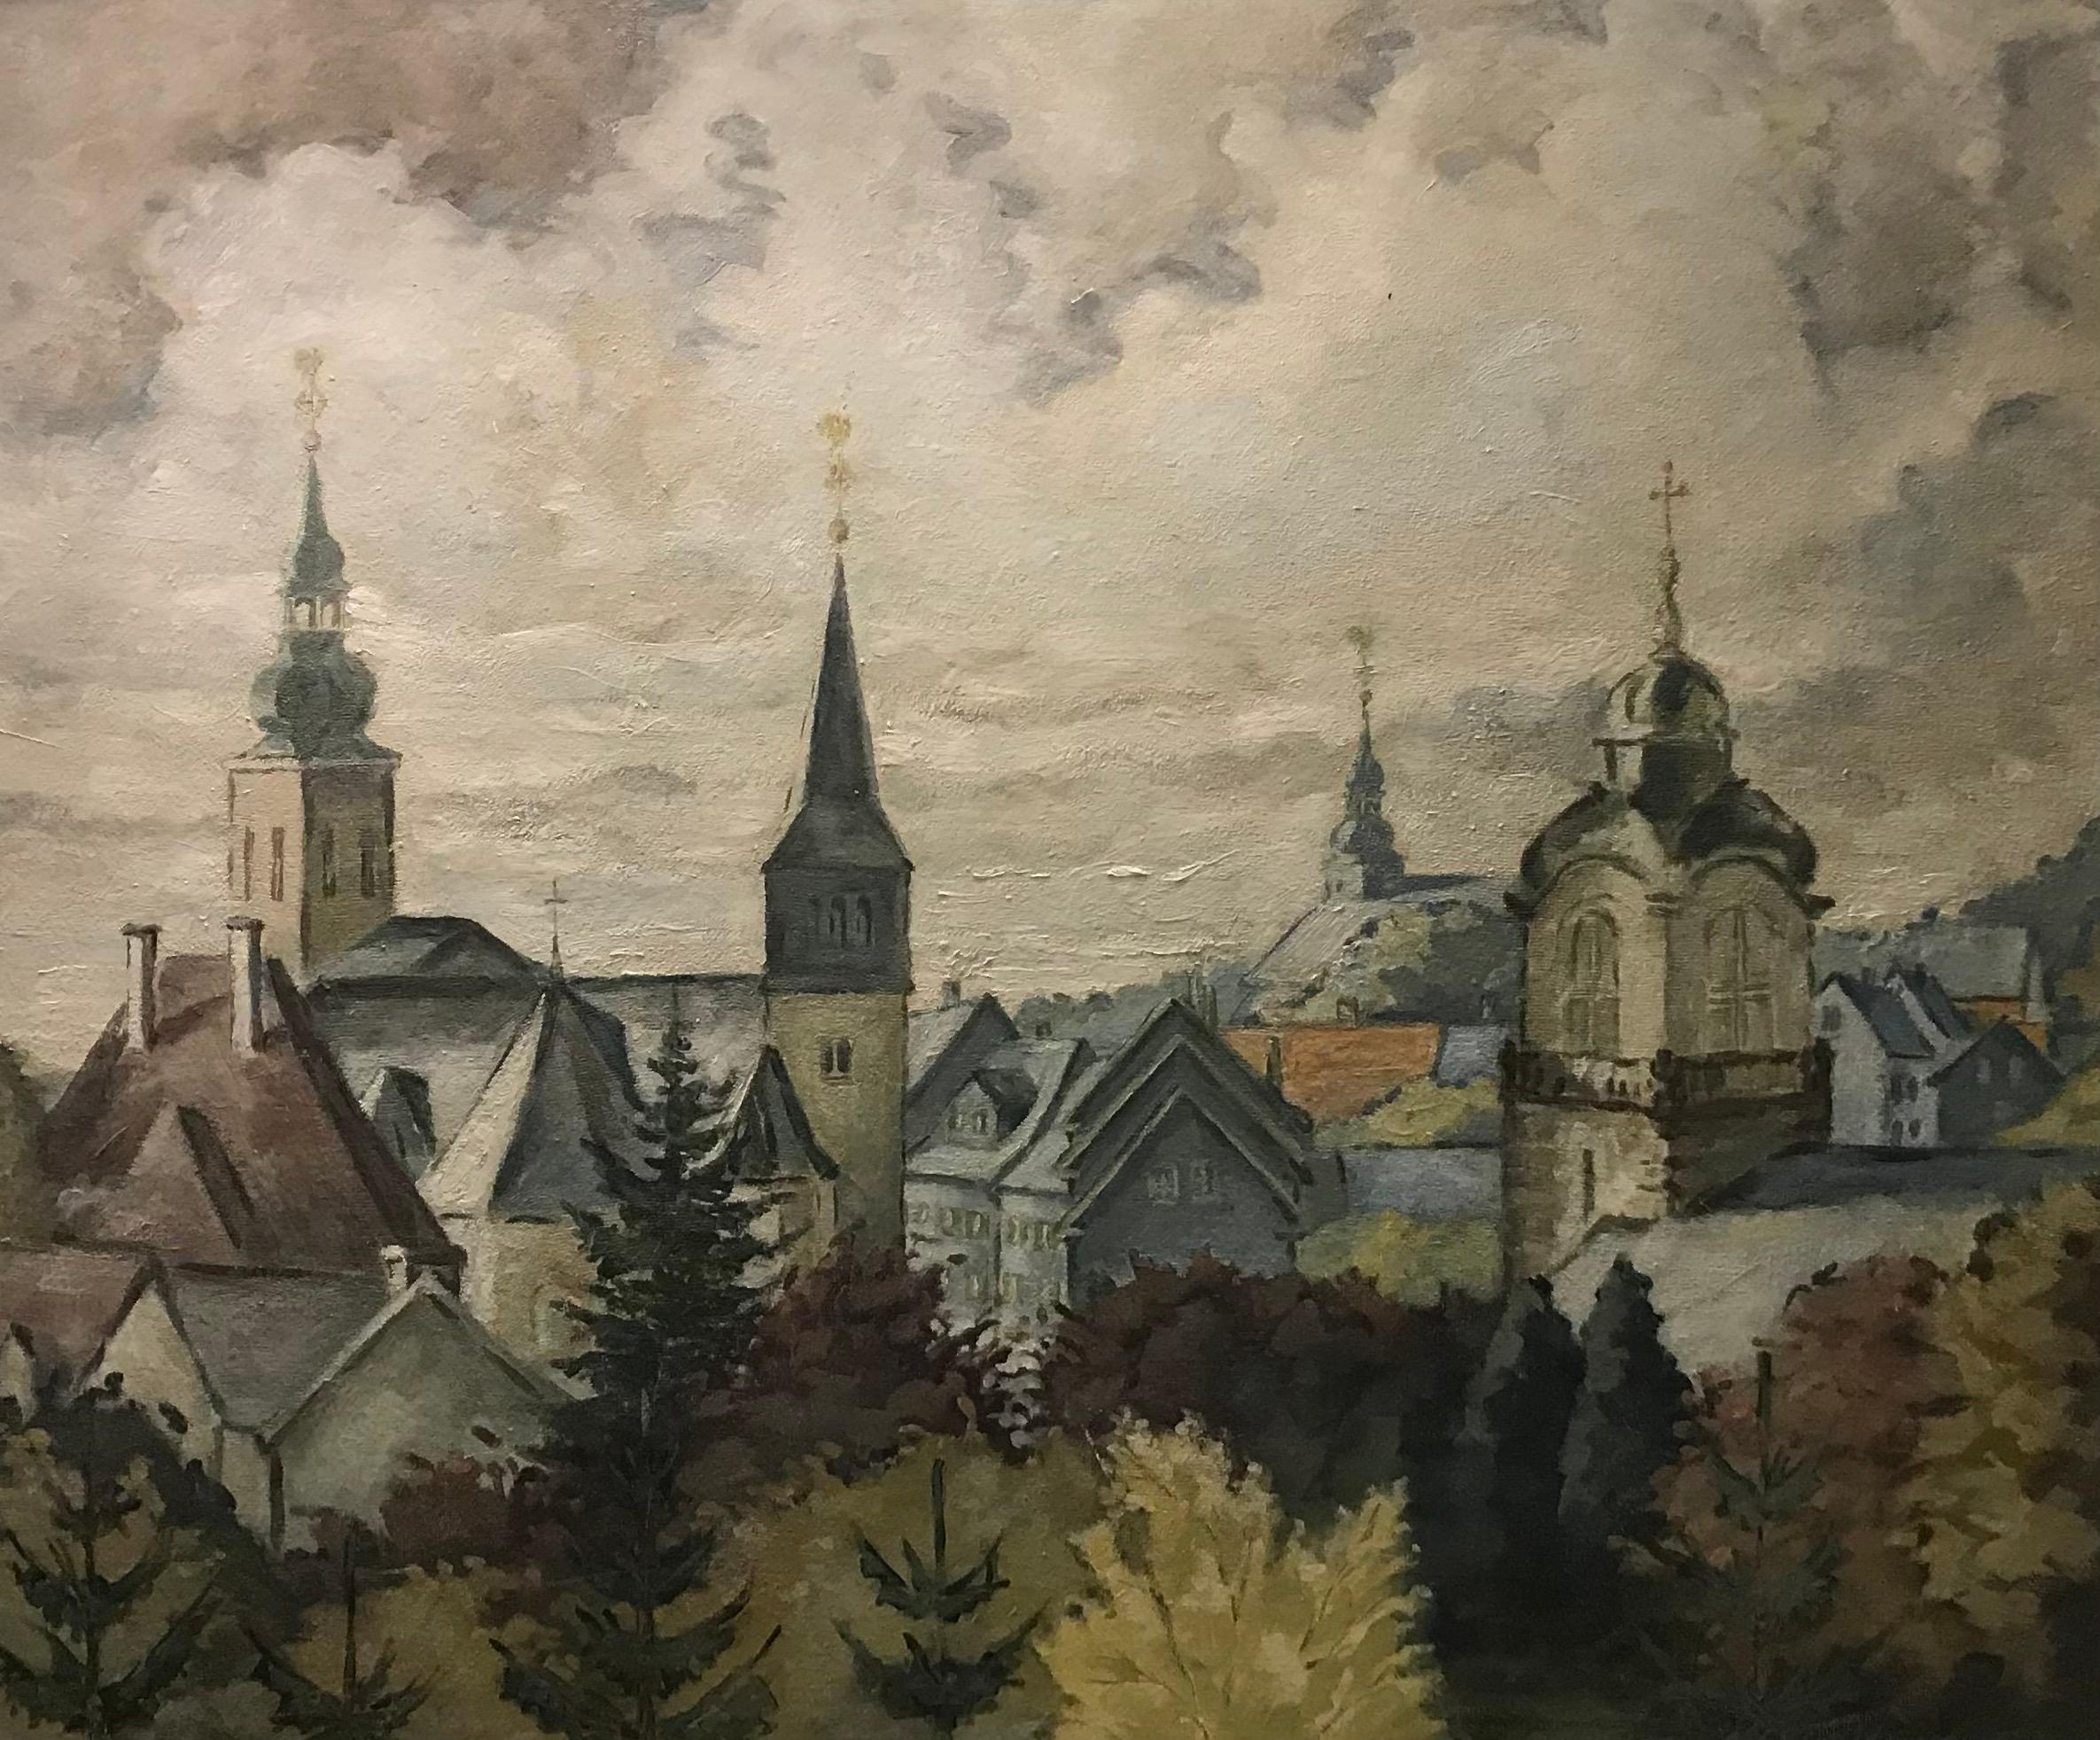 Unknown Landscape Painting - Landscape of a village with a view of steeples - Oil on canvas